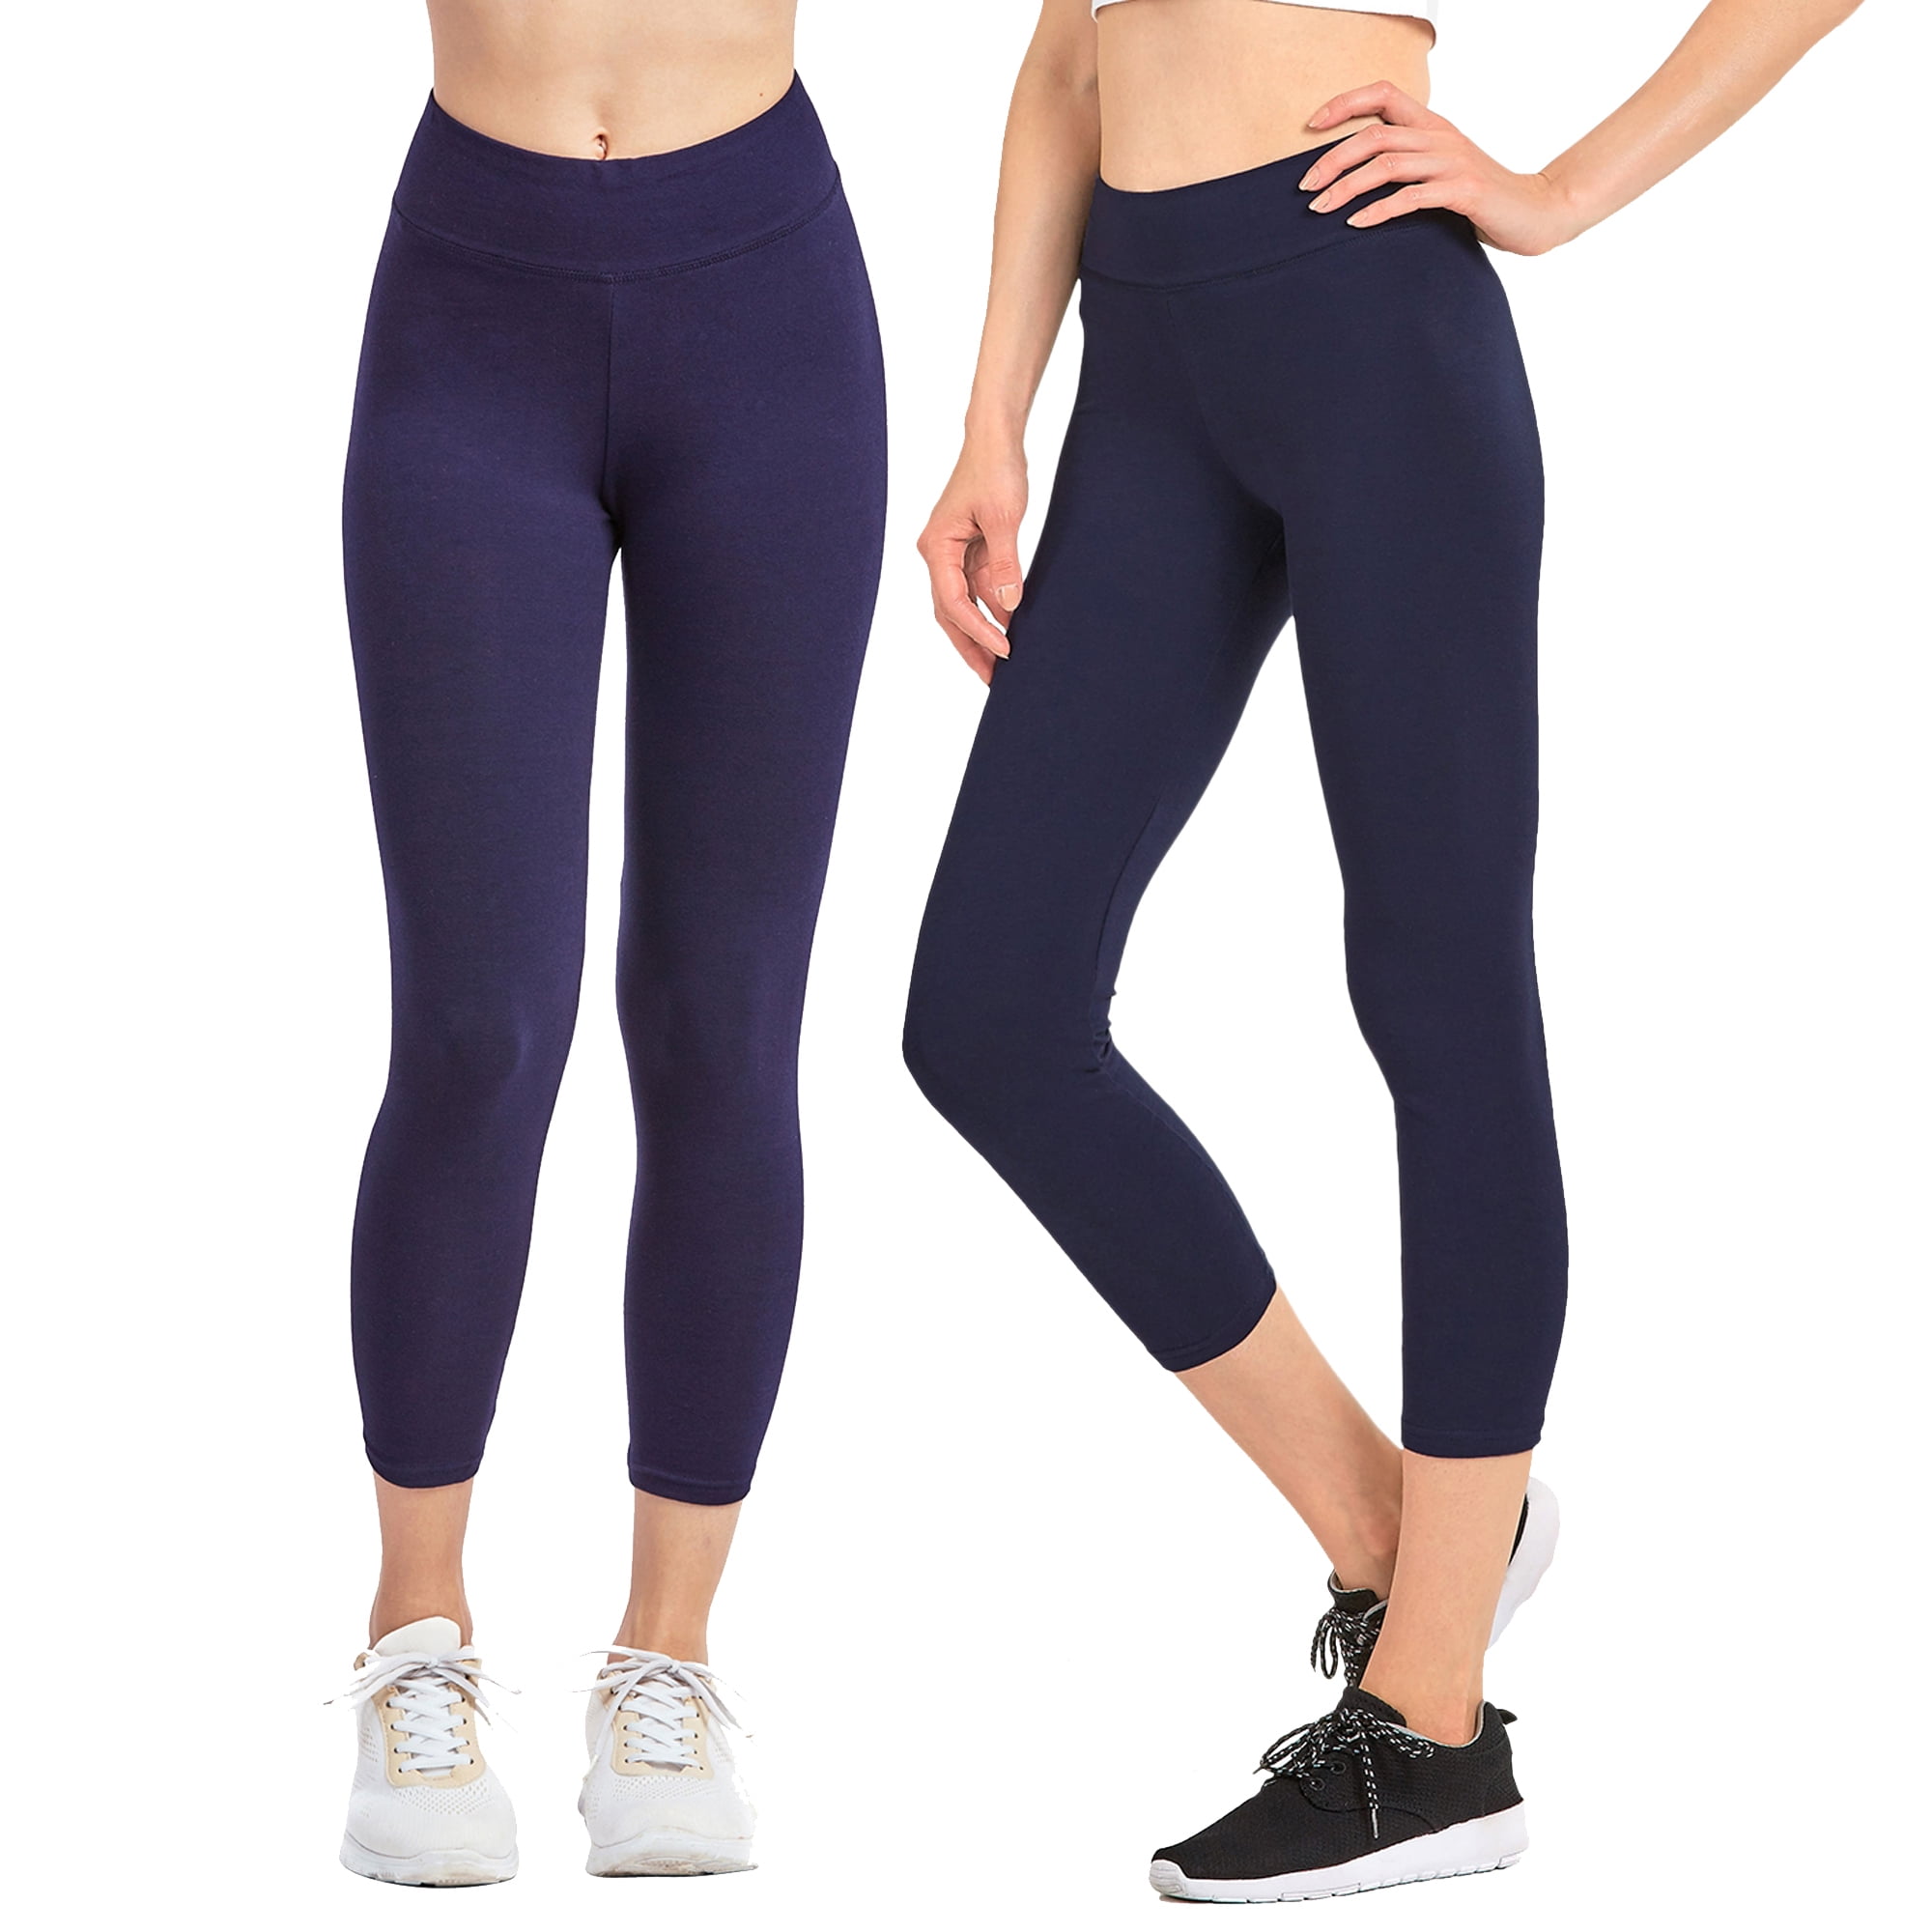 Thelovely Women And Plus Soft Cotton Active Stretch Capri Length Lightweight Leggings 2pk Navy